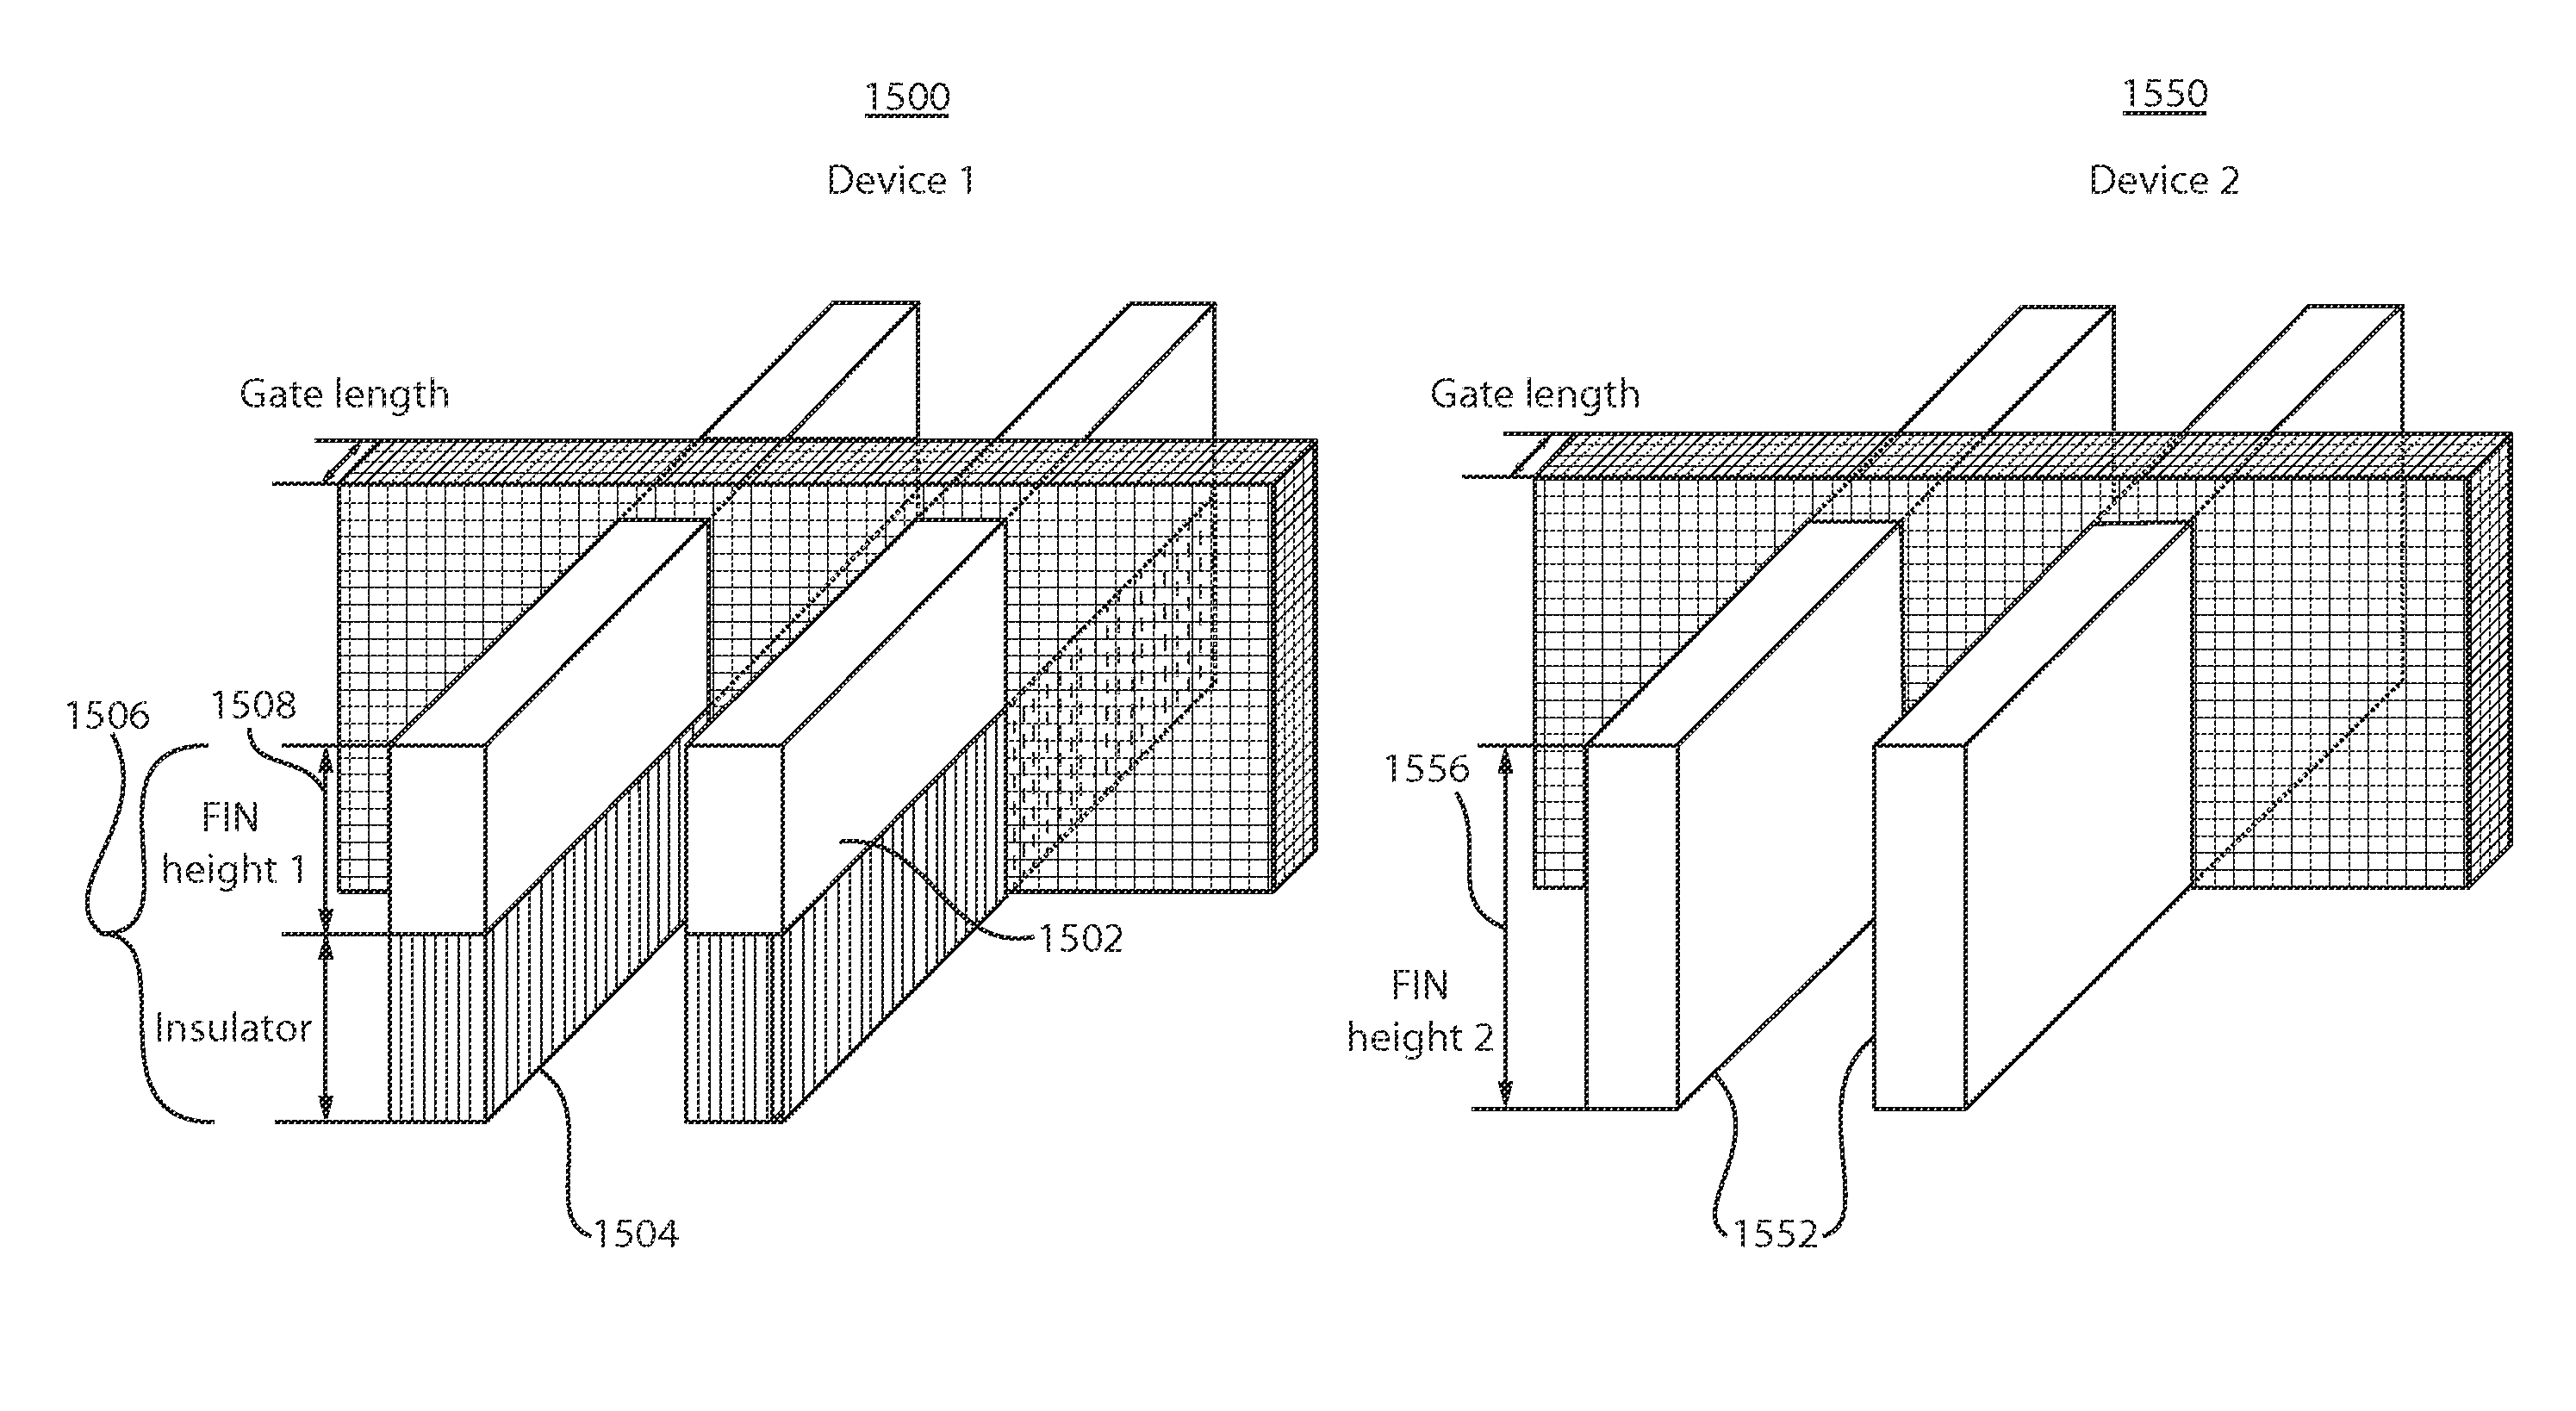 Multi-gate field-effect transistors with variable fin heights